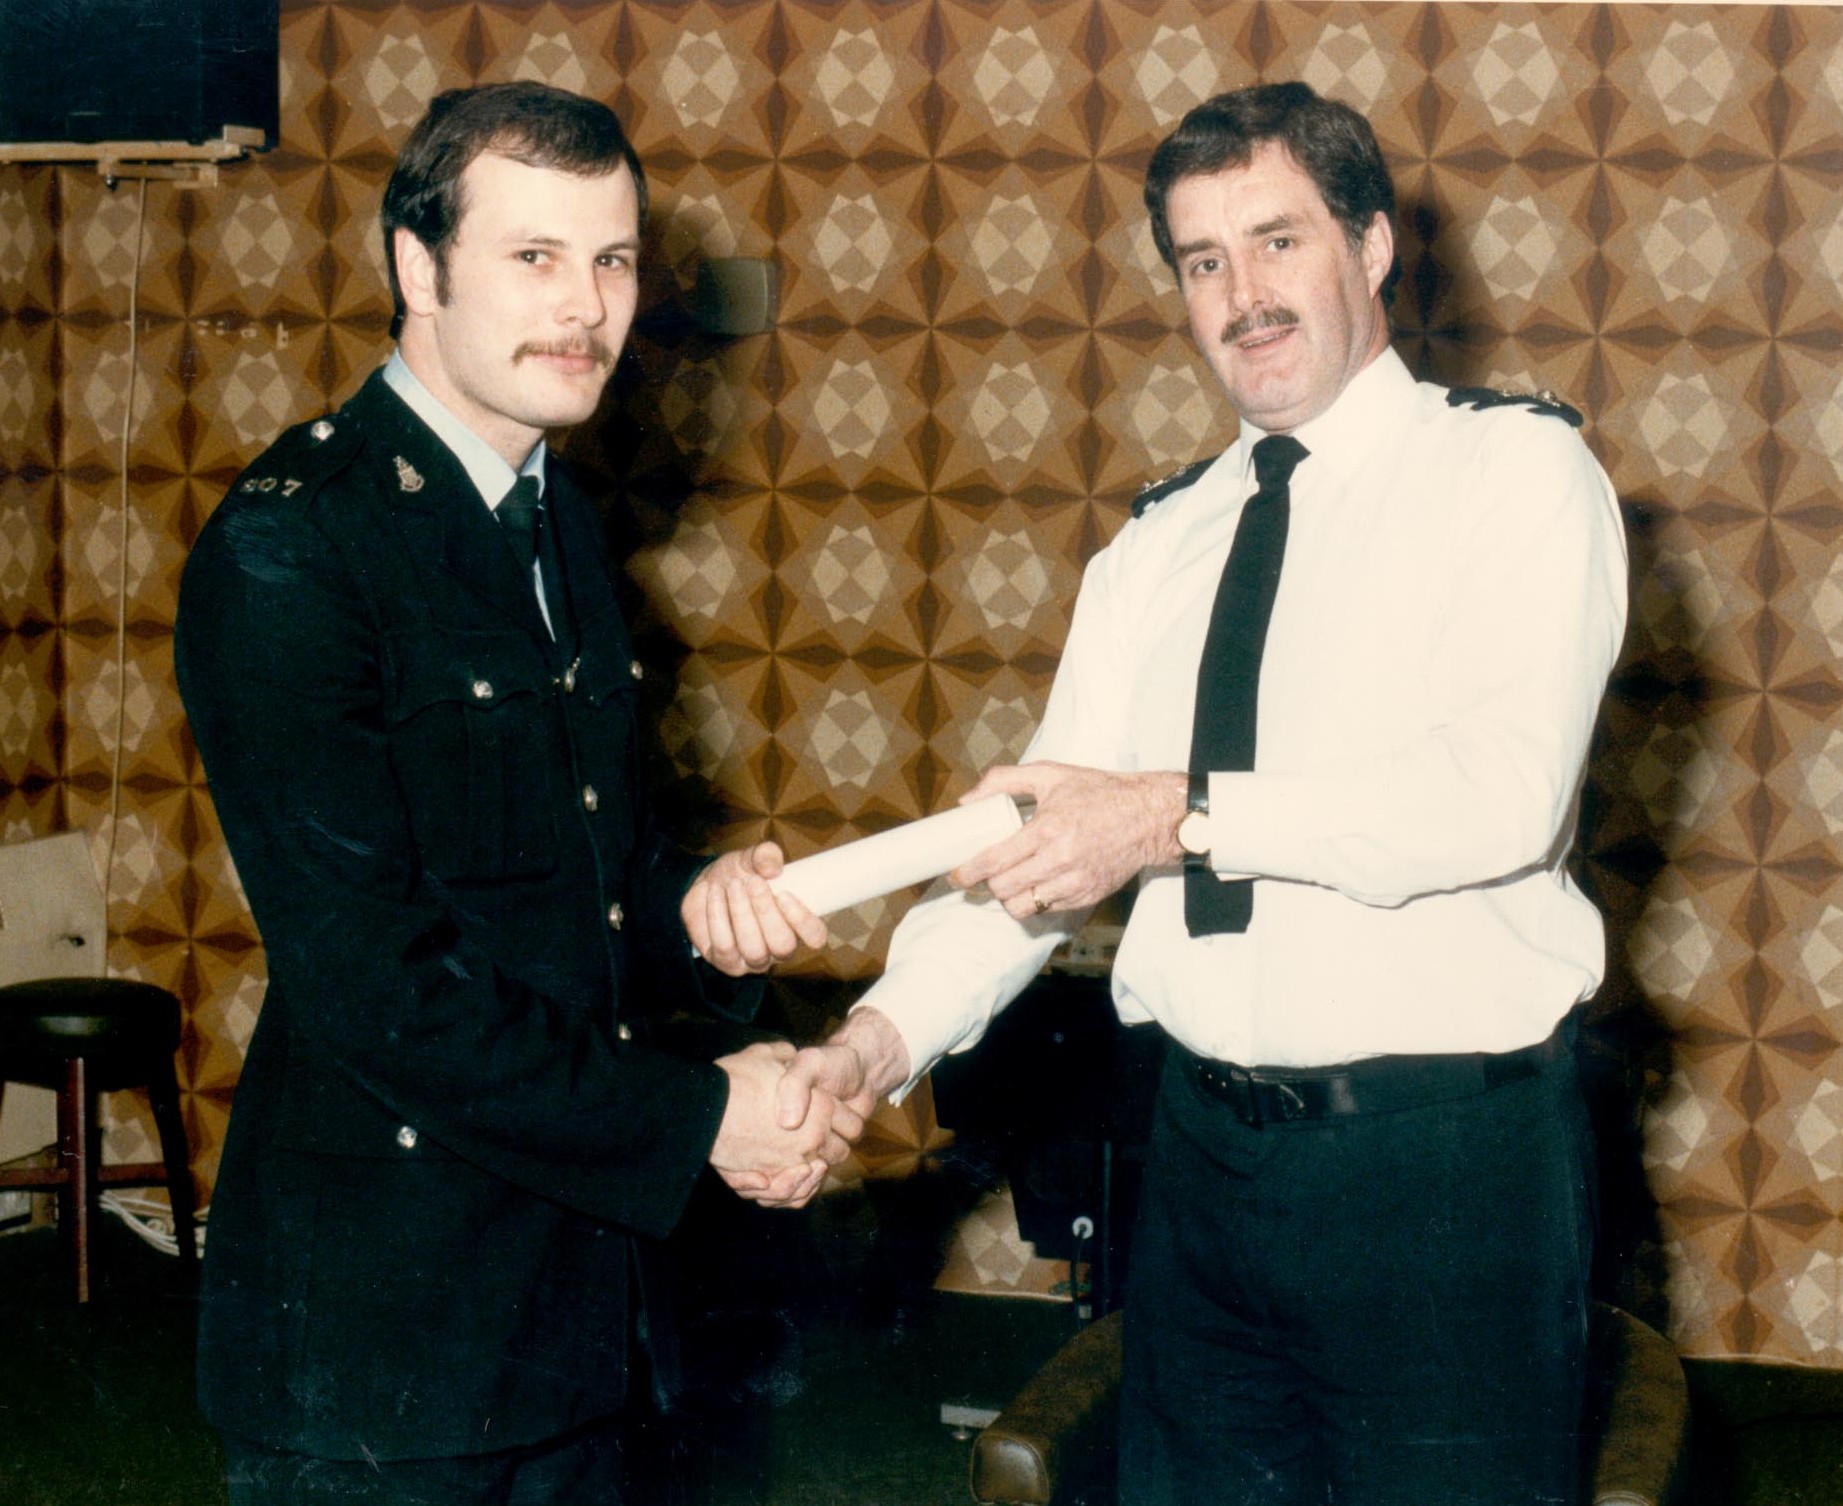  Chief Superintendent Joe Skipsey presenting Police Constable Paul Menhinick with his award for bravery. 1986. (Gloucestershire Police Archives URN 475)